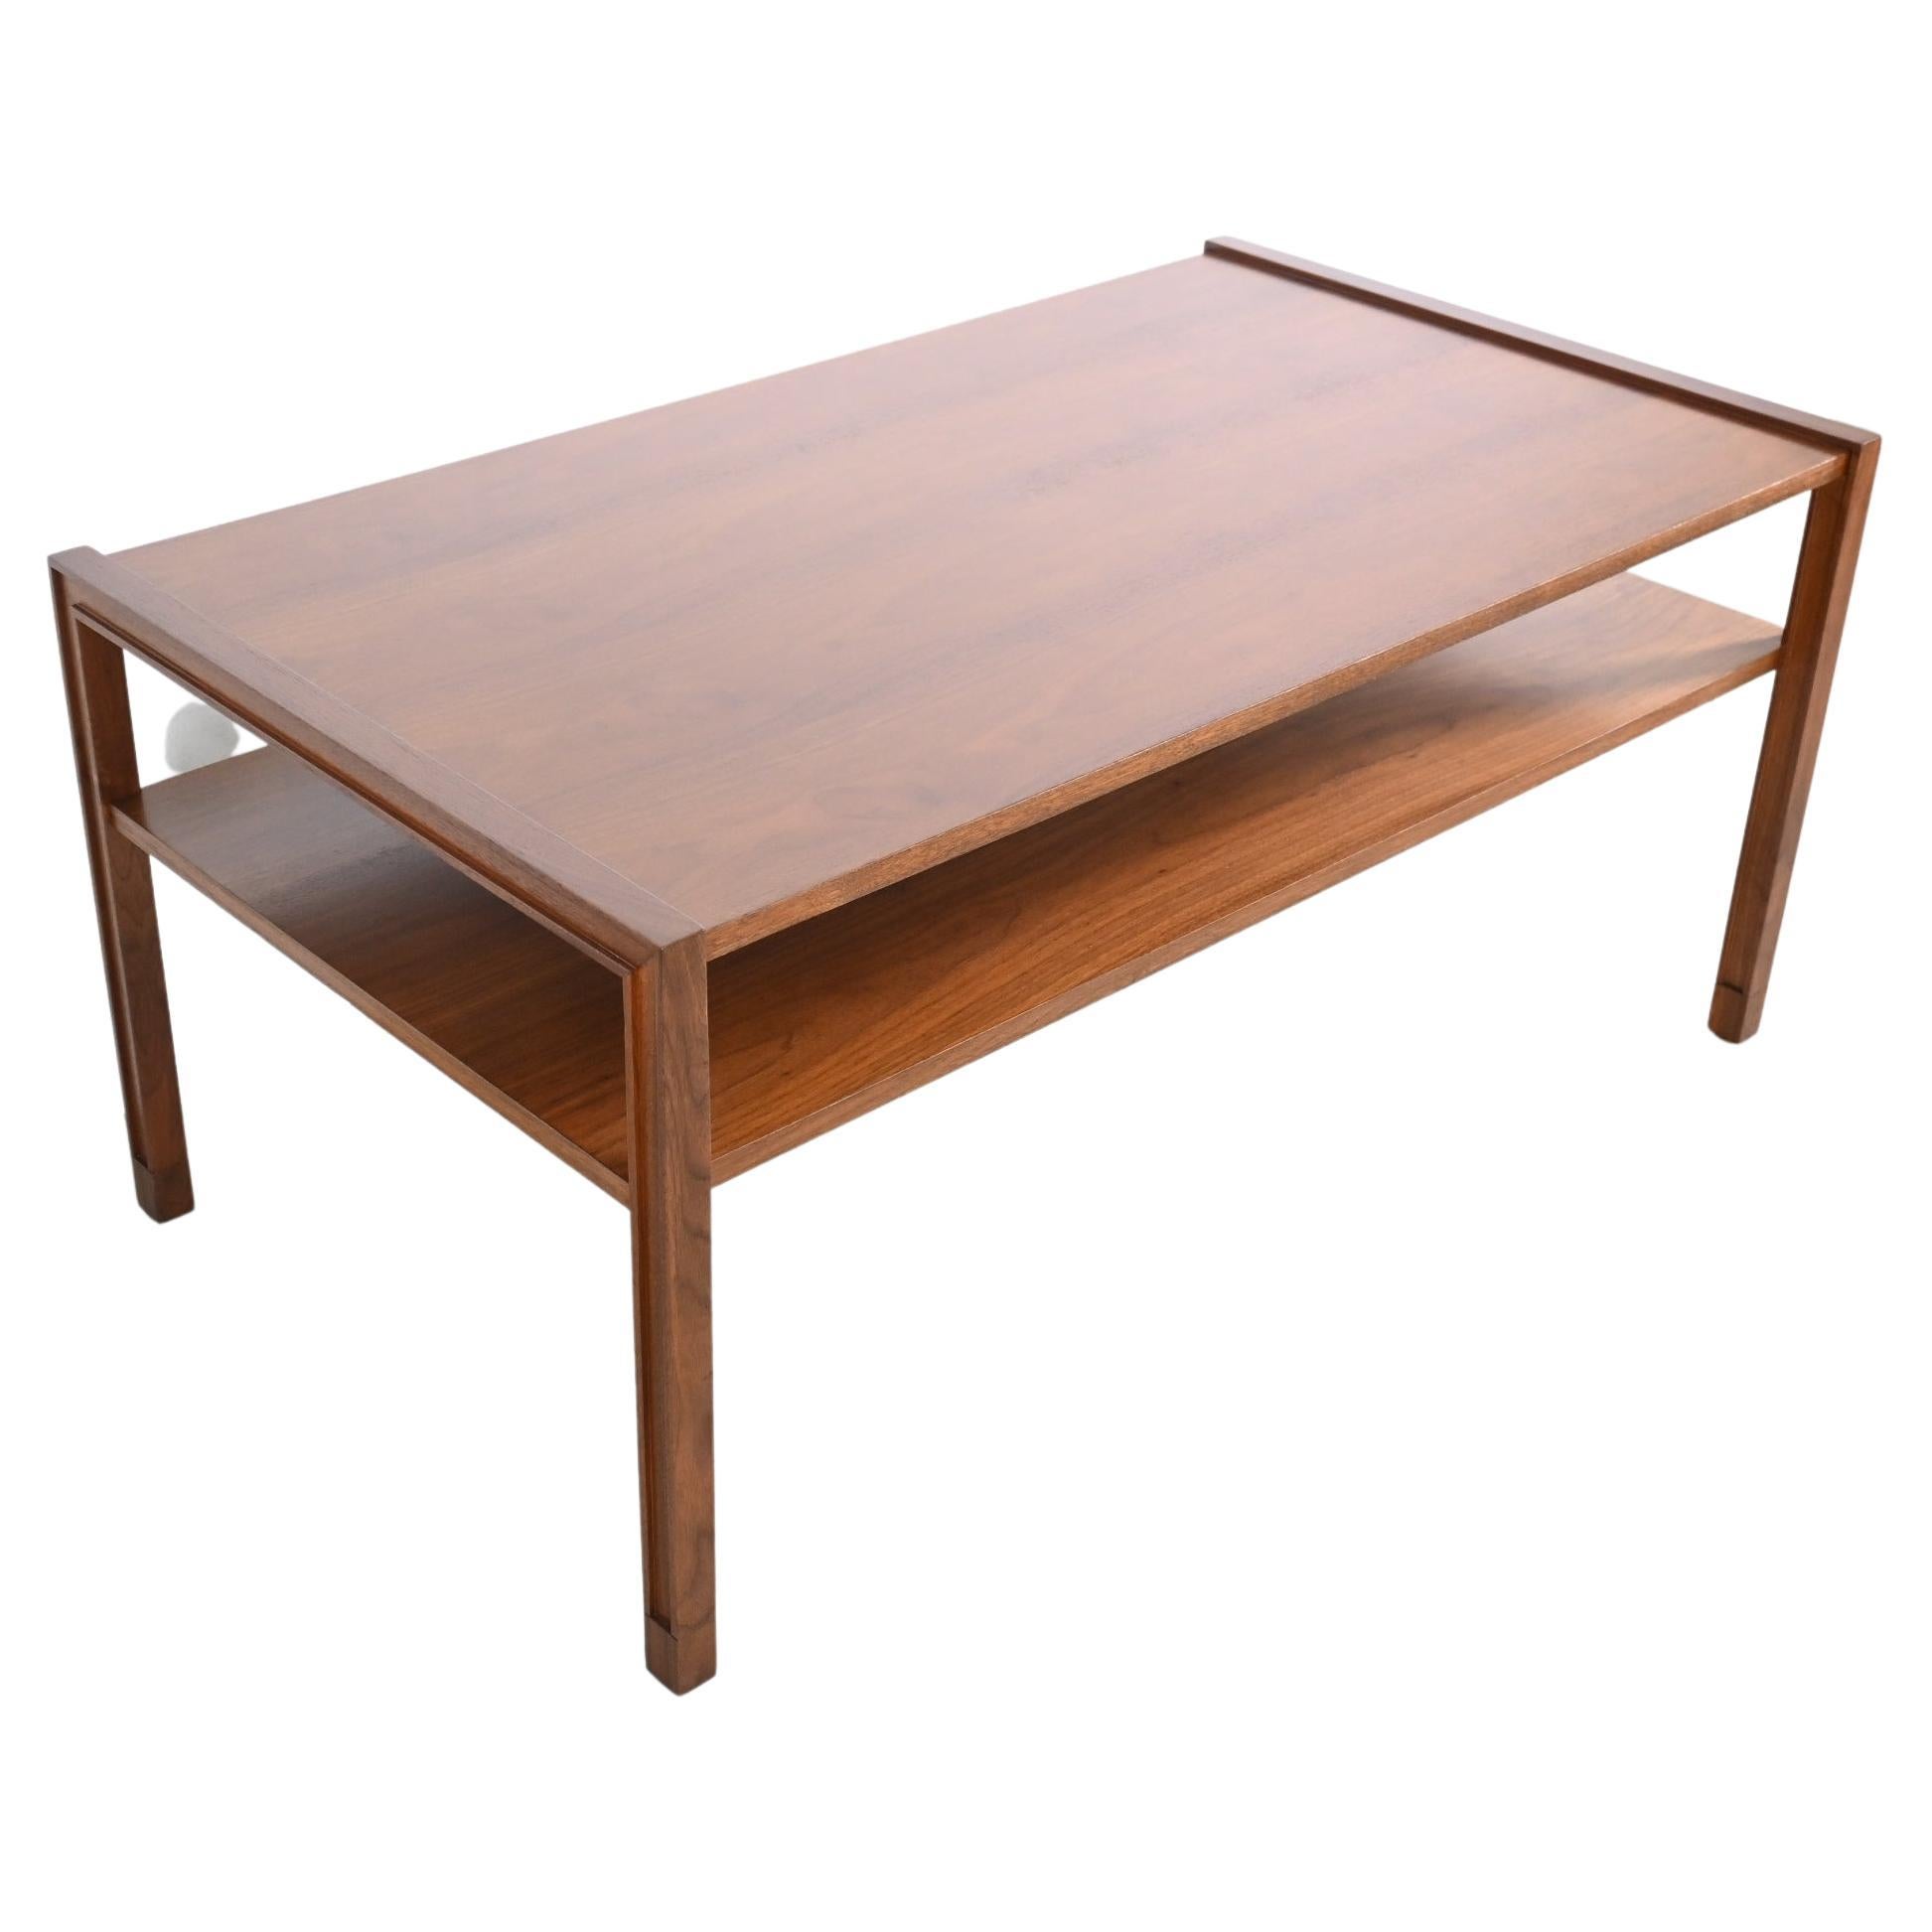 Dunbar Furniture Mid-Century Modern two tiered walnut coffee table

Dunbar Furniture, USA, 1950s, Unmarked

Measures: 48 Wide x 27 Deep x 22.25 High

Mid-Century Modern walnut coffee or cocktail table with shelf.

Professionally refinished.